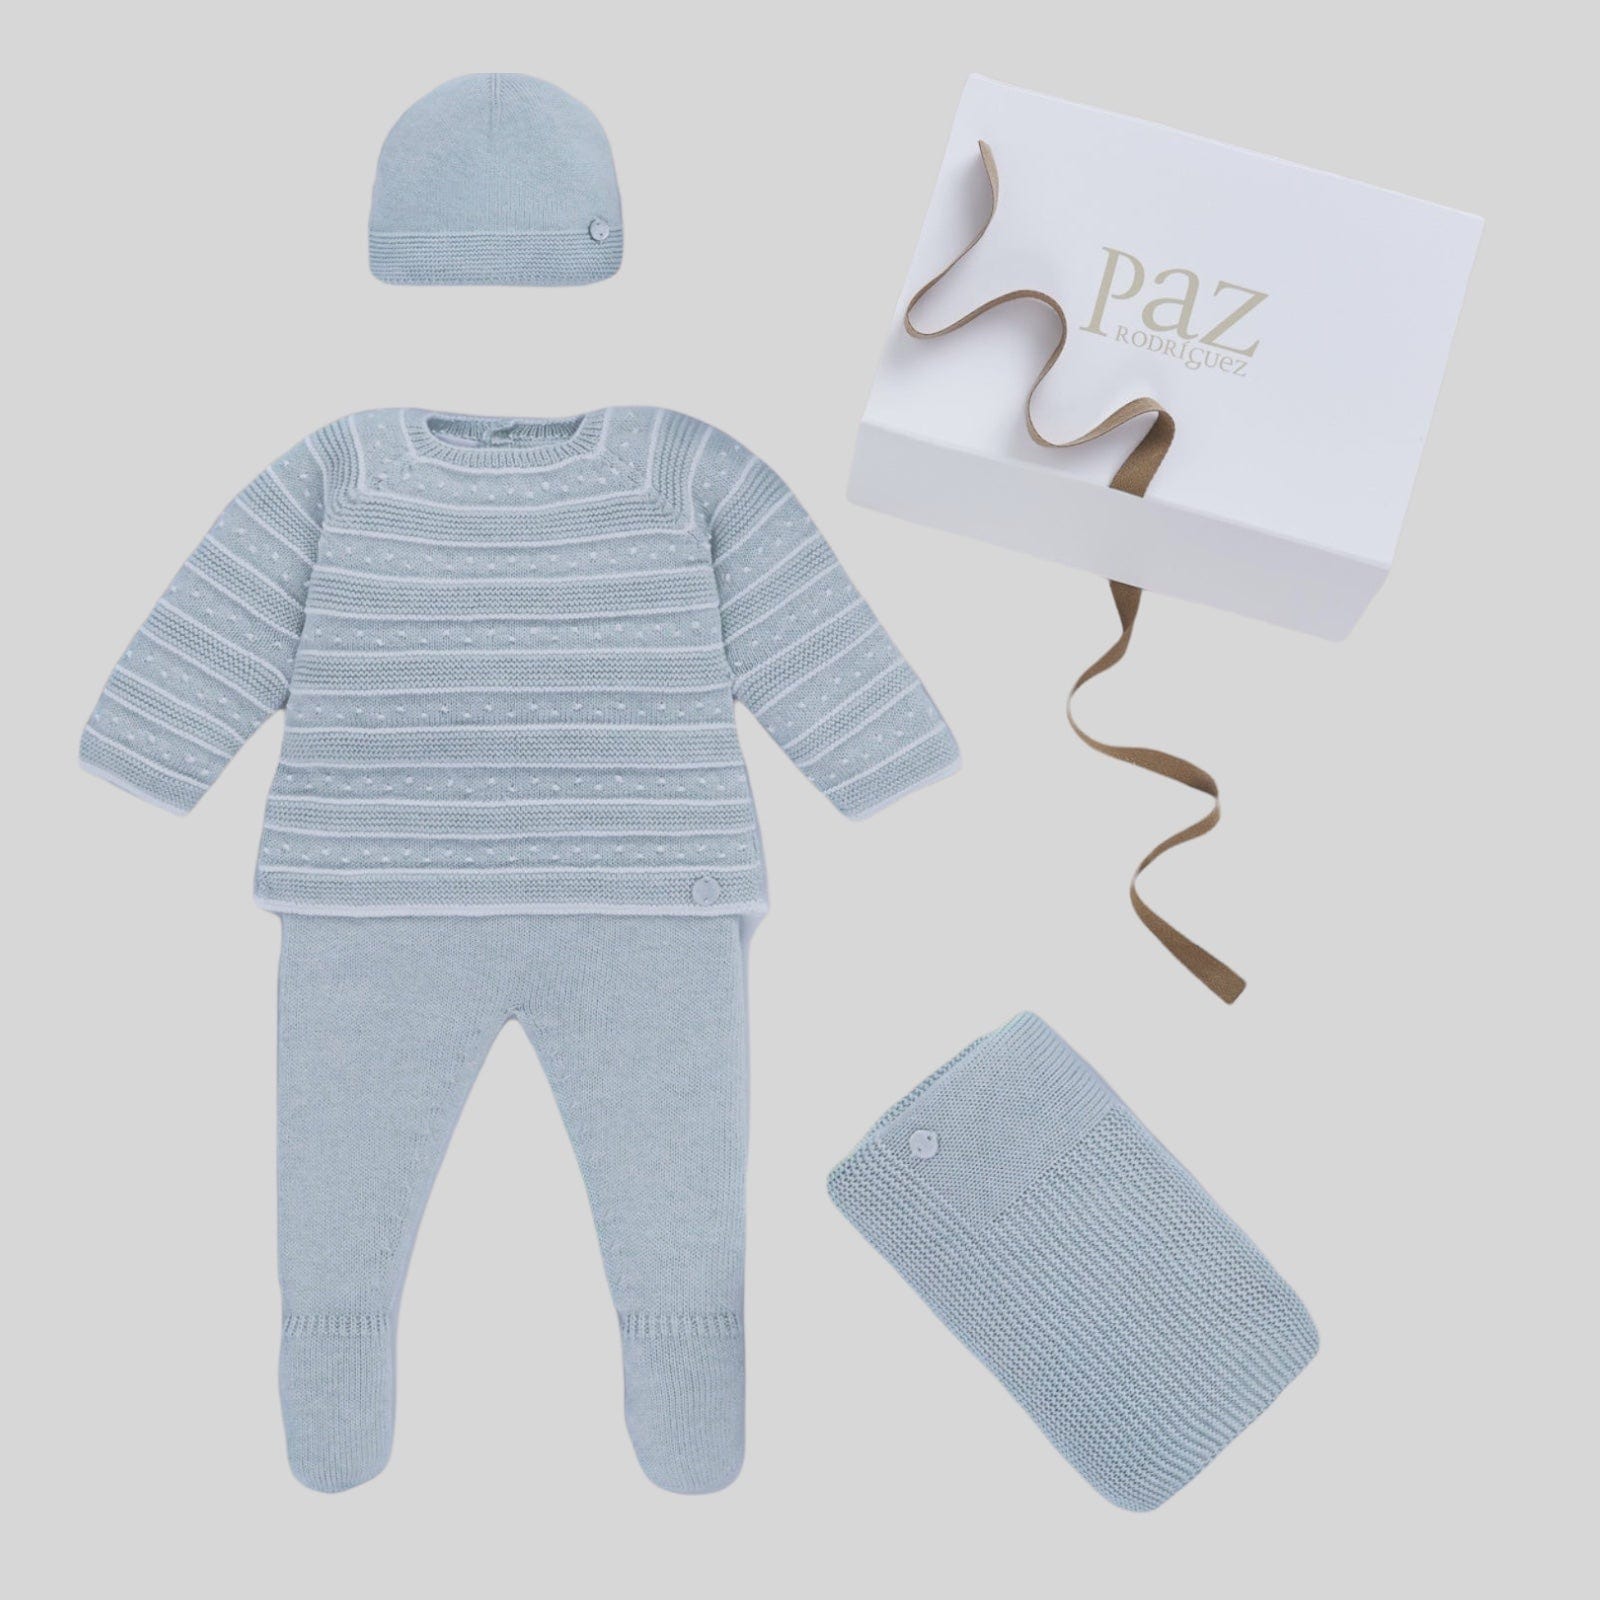 Paz Rodriguez Grey Knitted Gift Set inc Knitted Blanket & Hat